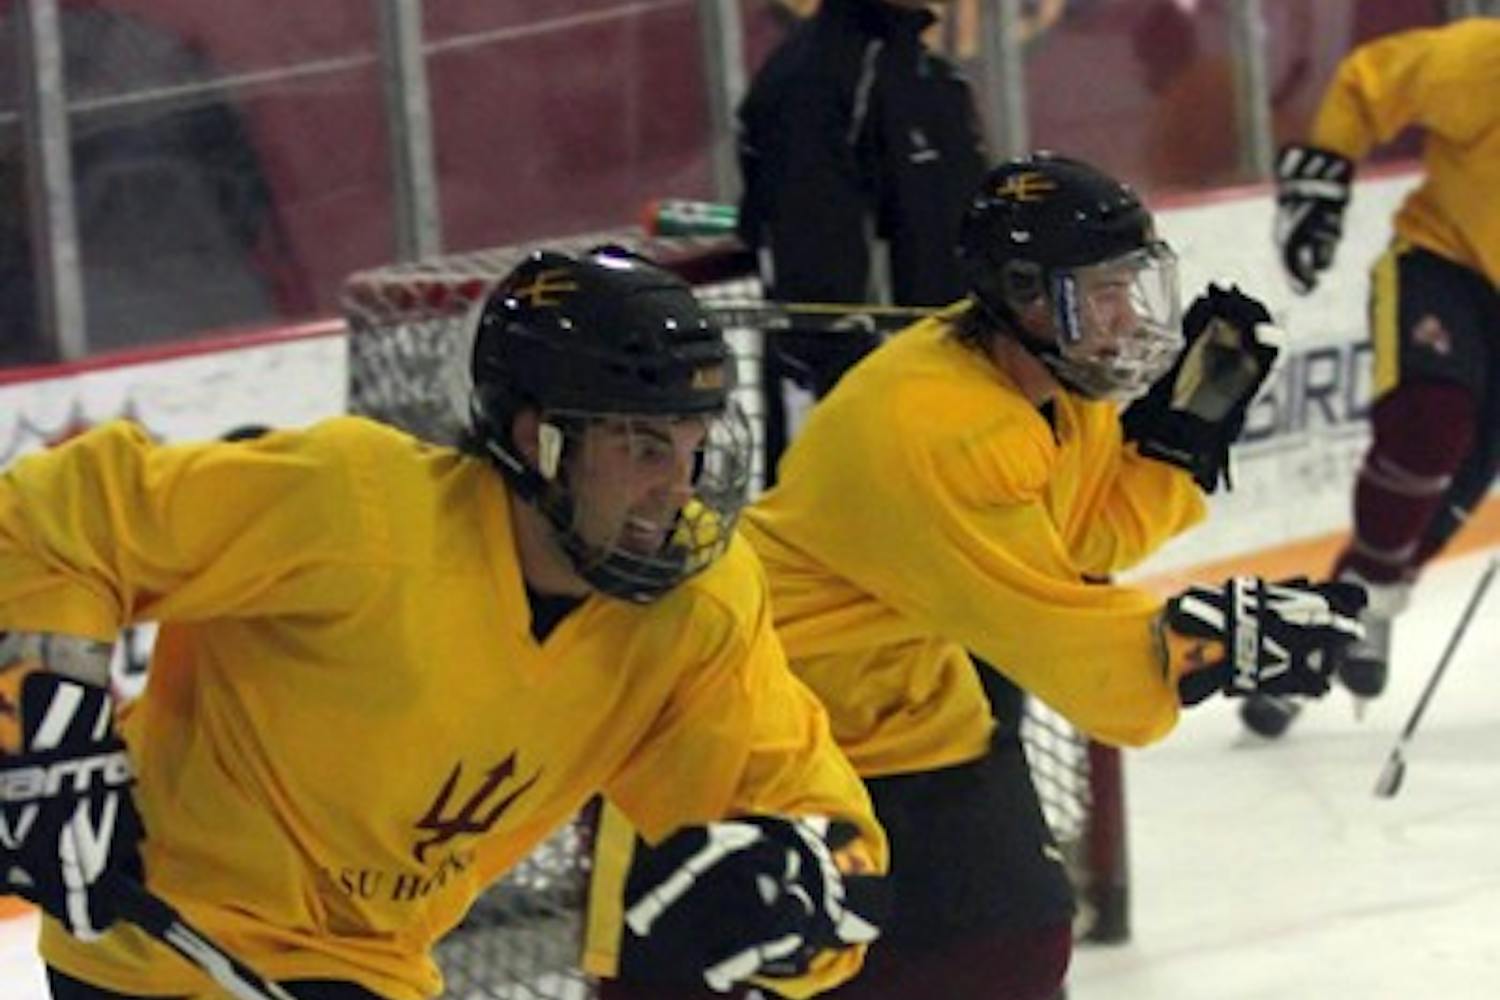 GREAT EXPECTATIONS: Members of the ASU club hockey team skate sprints during practice on Tuesday. Despite losing a core group of starters from last year, the Sun Devils are confident they can reload for the 2011-12 season. (Photo by Lisa Bartoli)